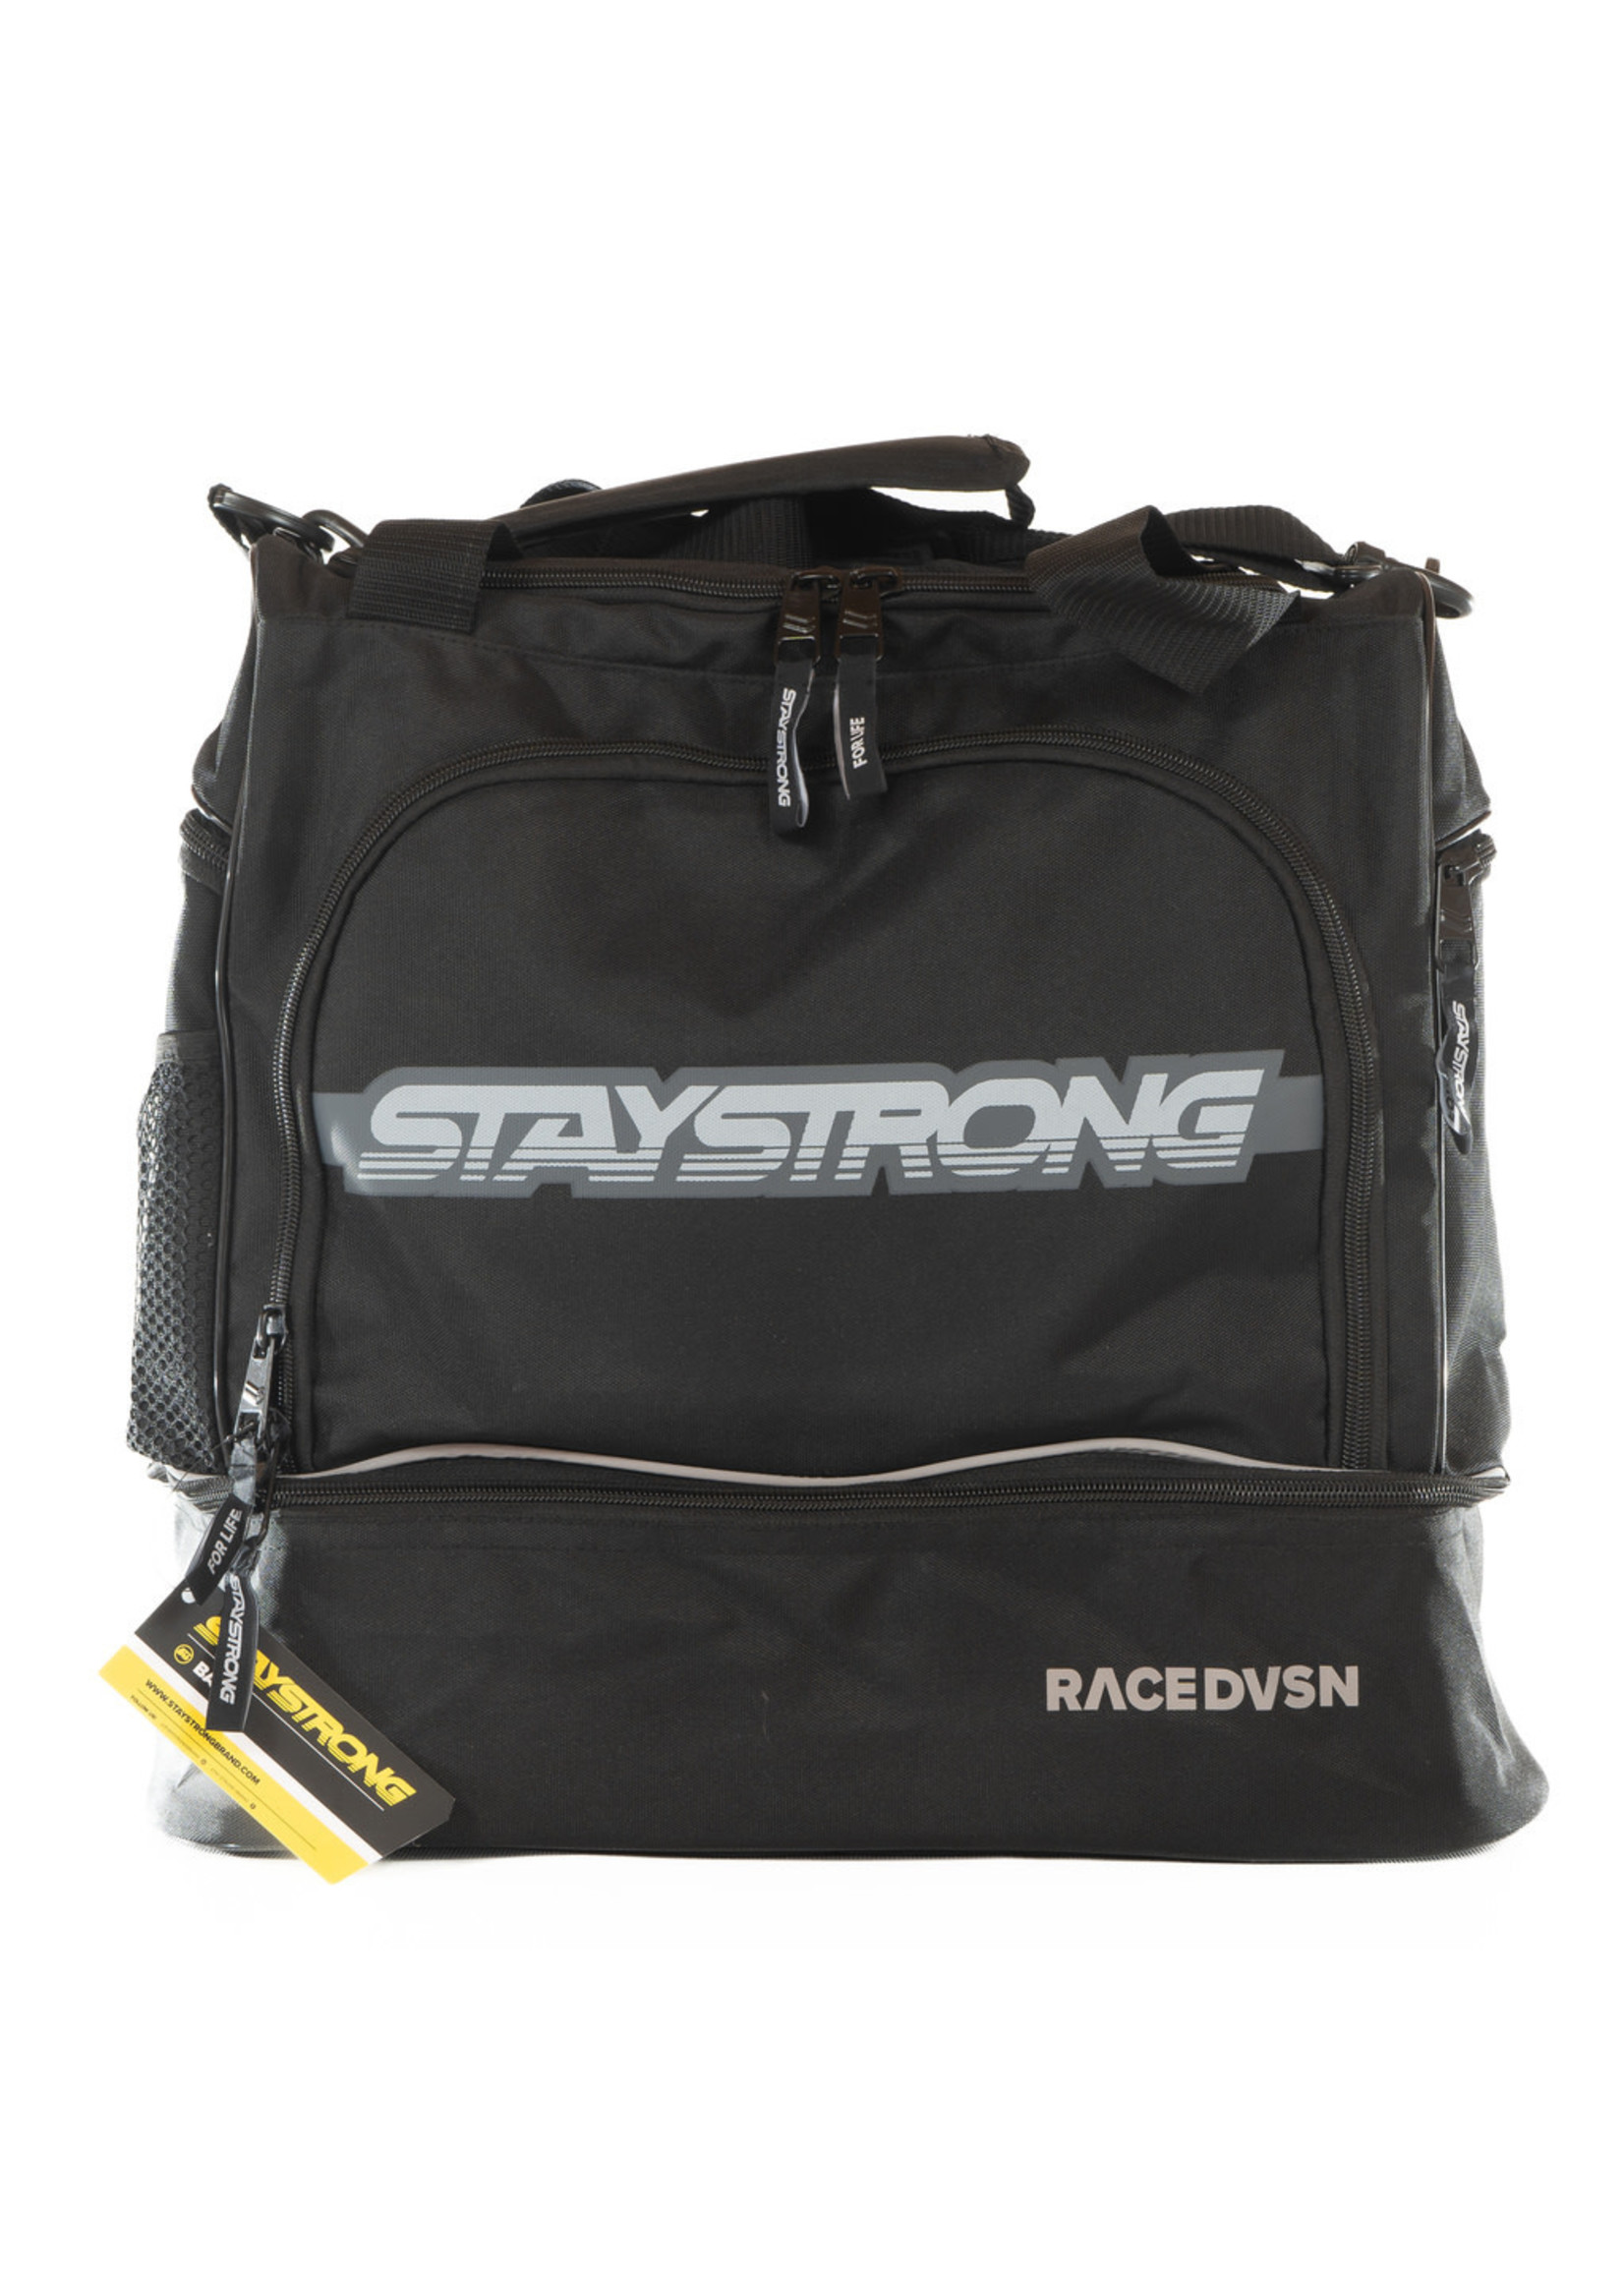 Stay Strong Bag Staystrong Chevron Helmet-Kit